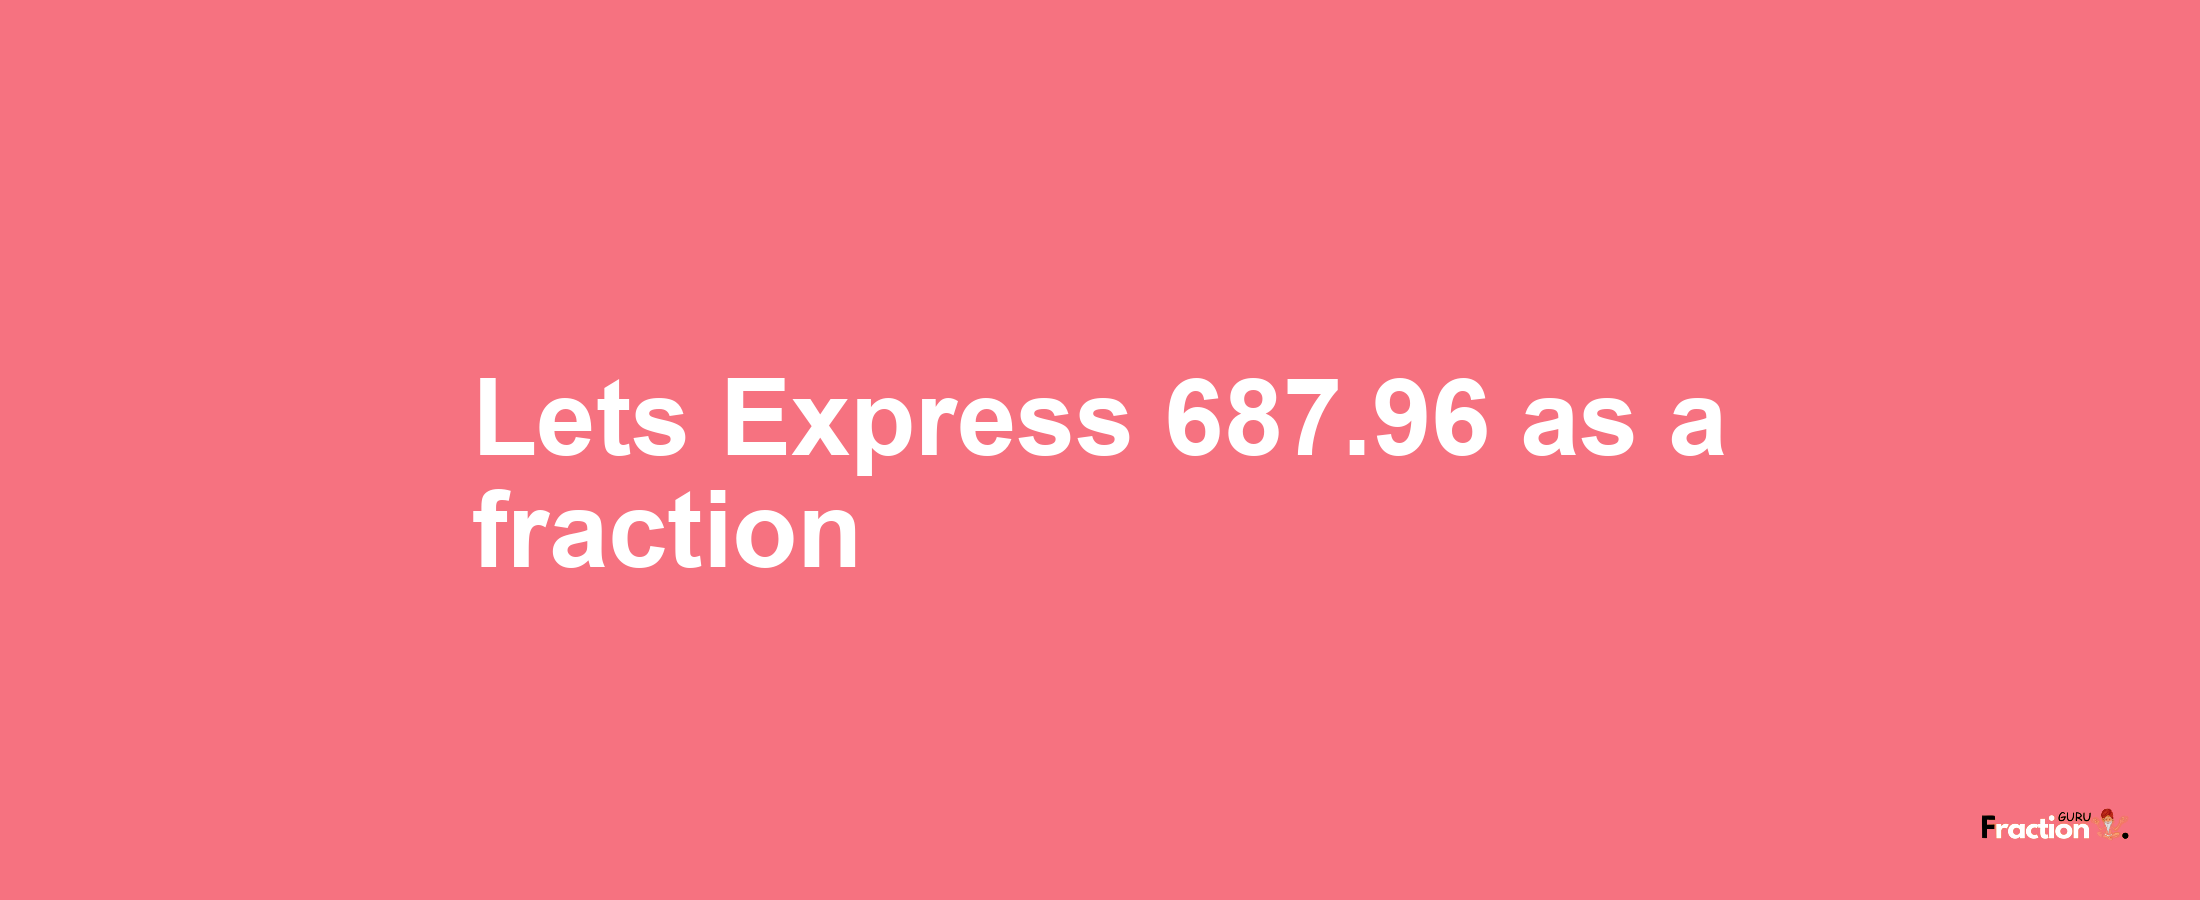 Lets Express 687.96 as afraction